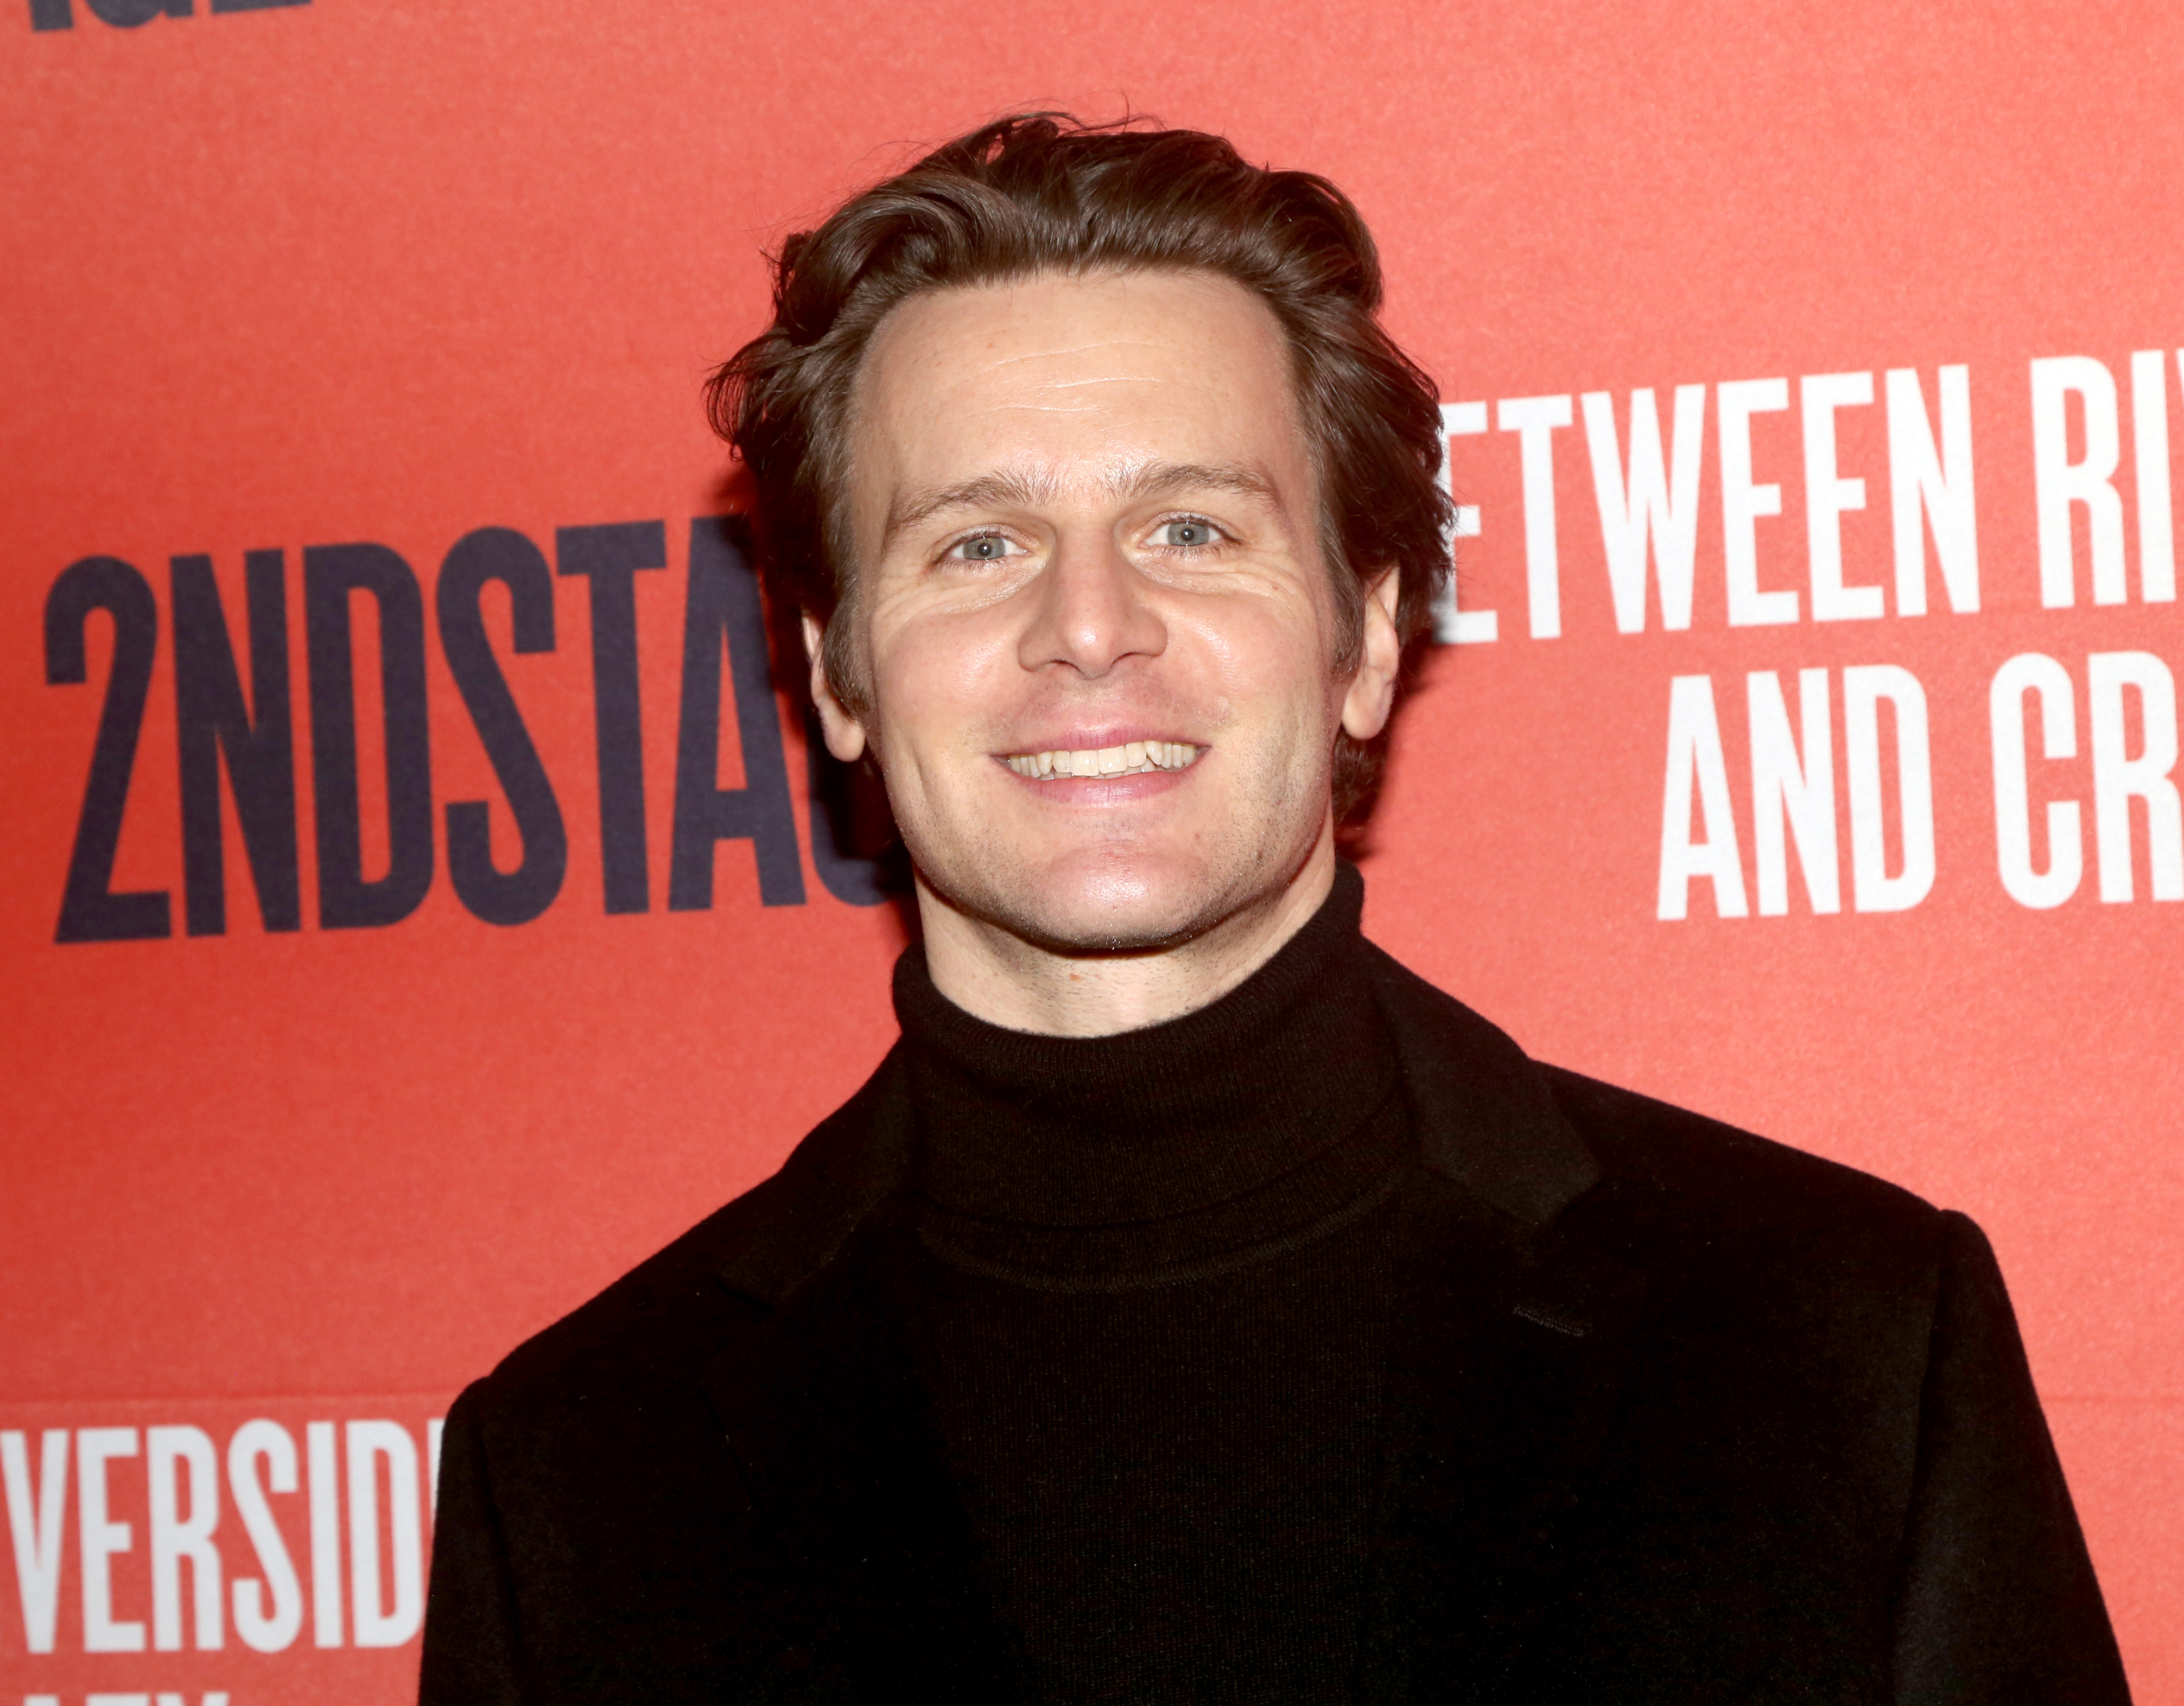 Jonathan Groff poses at the opening night of the Second Stage production of "Between Riverside and Crazy" on Broadway at The Hayes Theater, on December 19, 2022, in New York City. | Source: Getty Images